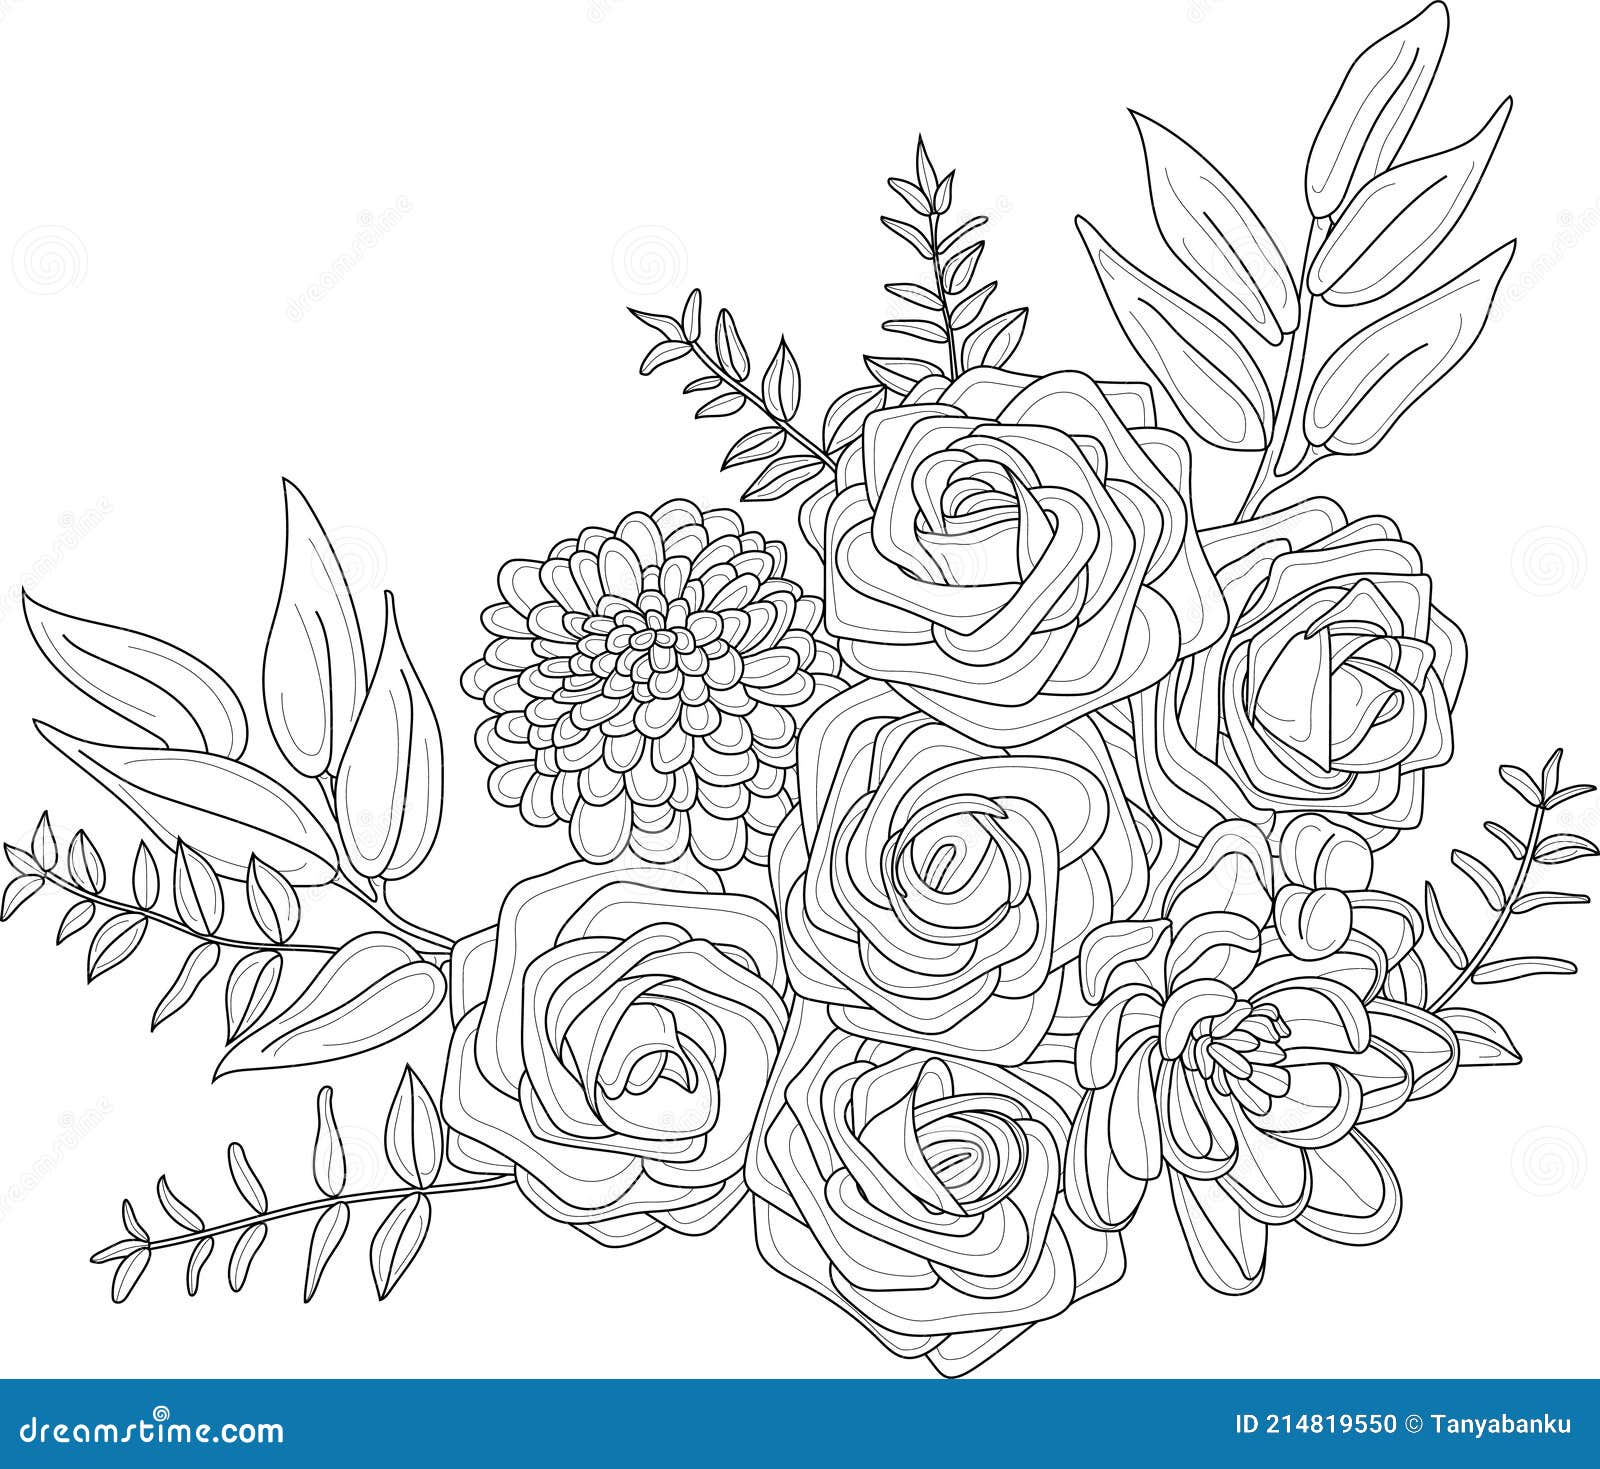 How To Draw Flower Bouquet  Easy Flower Bouquet Drawing Transparent PNG   680x678  Free Download on NicePNG